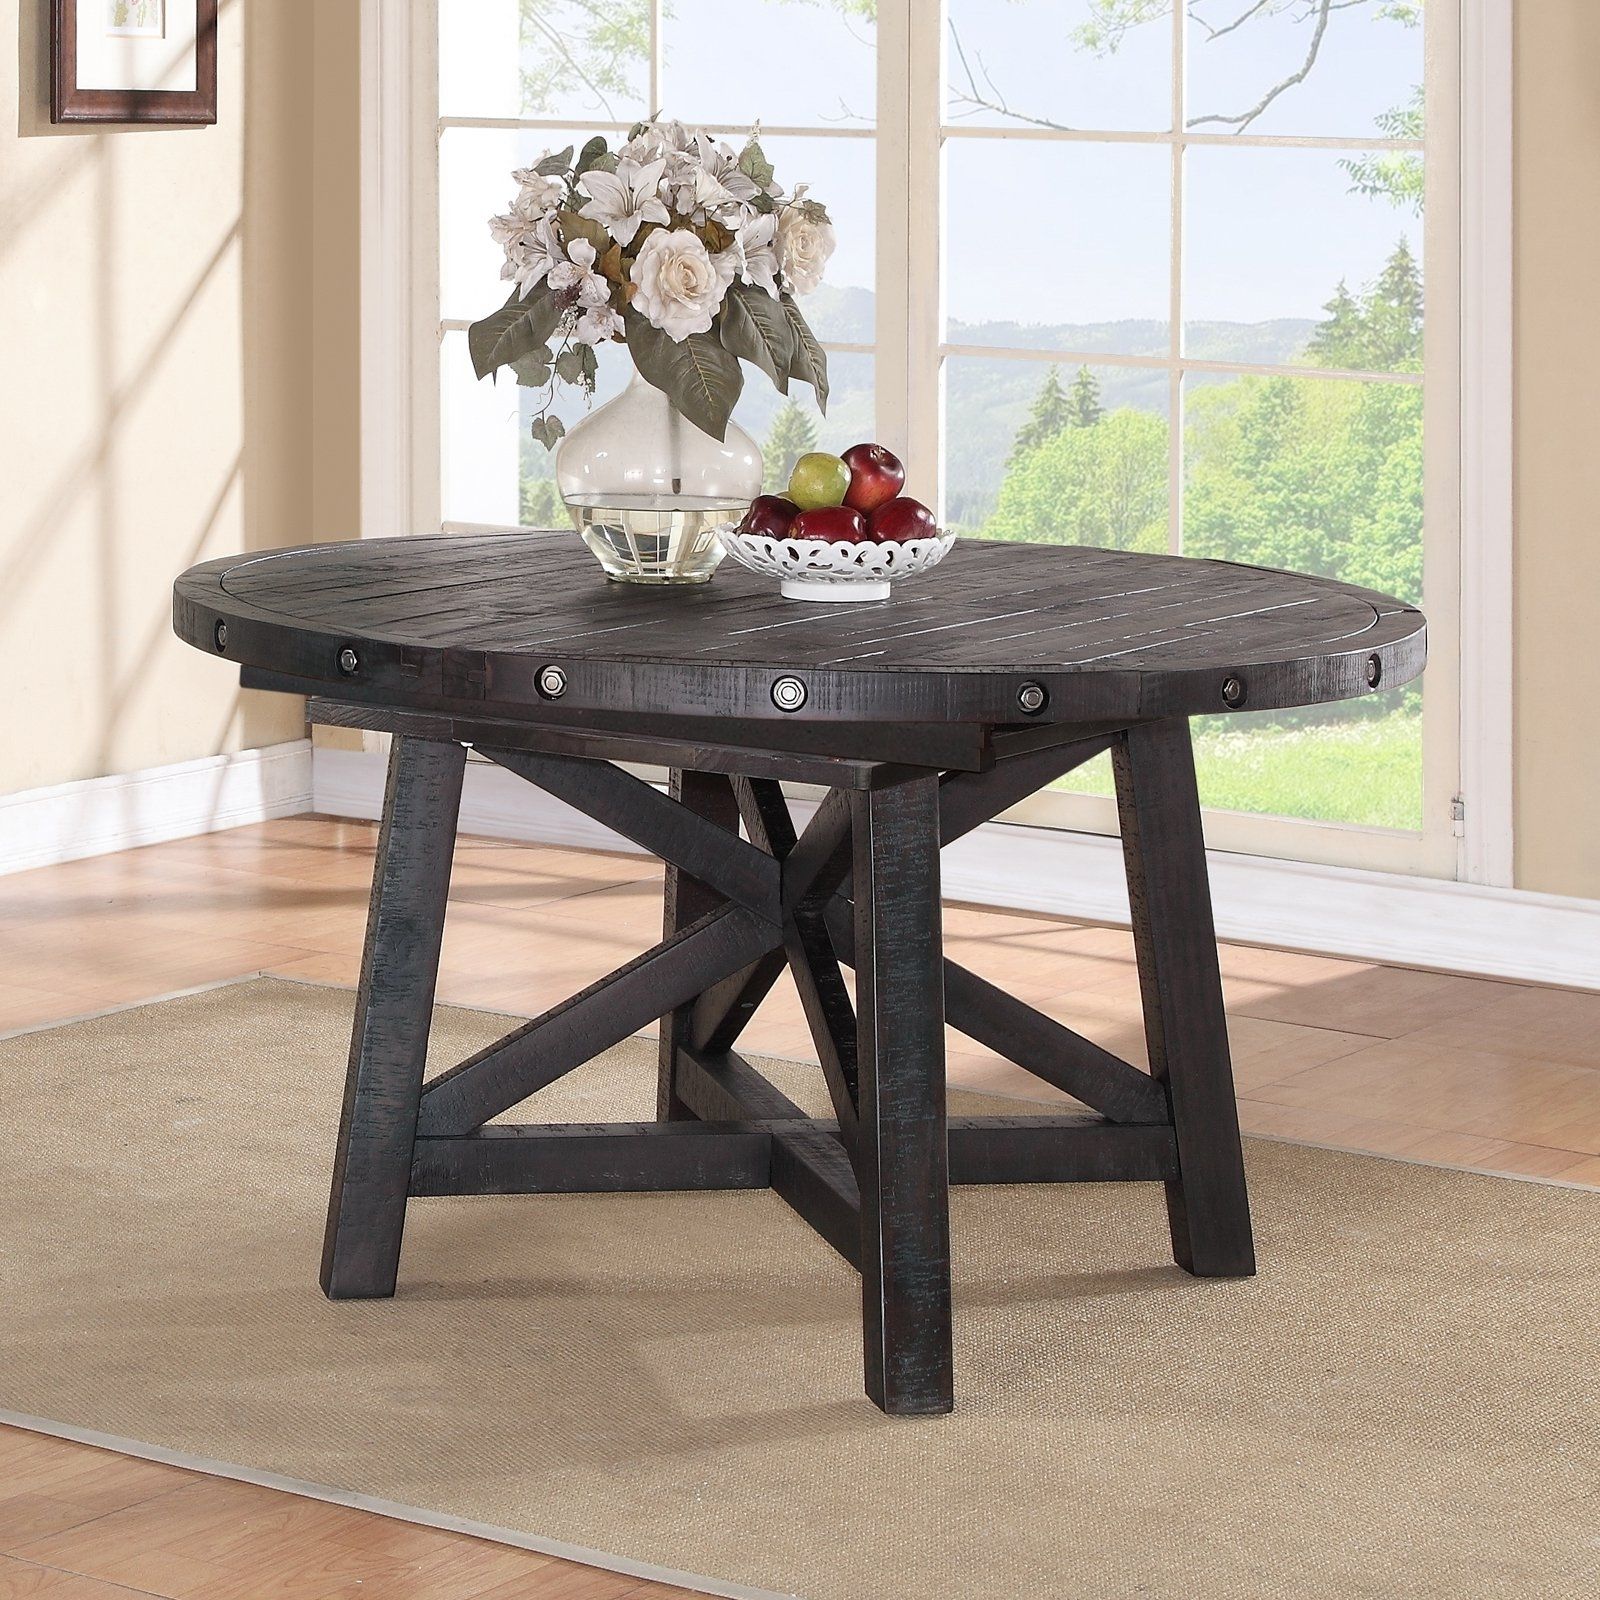 Best And Newest Lassen Extension Rectangle Dining Tables Inside Modus Yosemite Solid Wood Round Extension Table – Cafe (View 10 of 25)